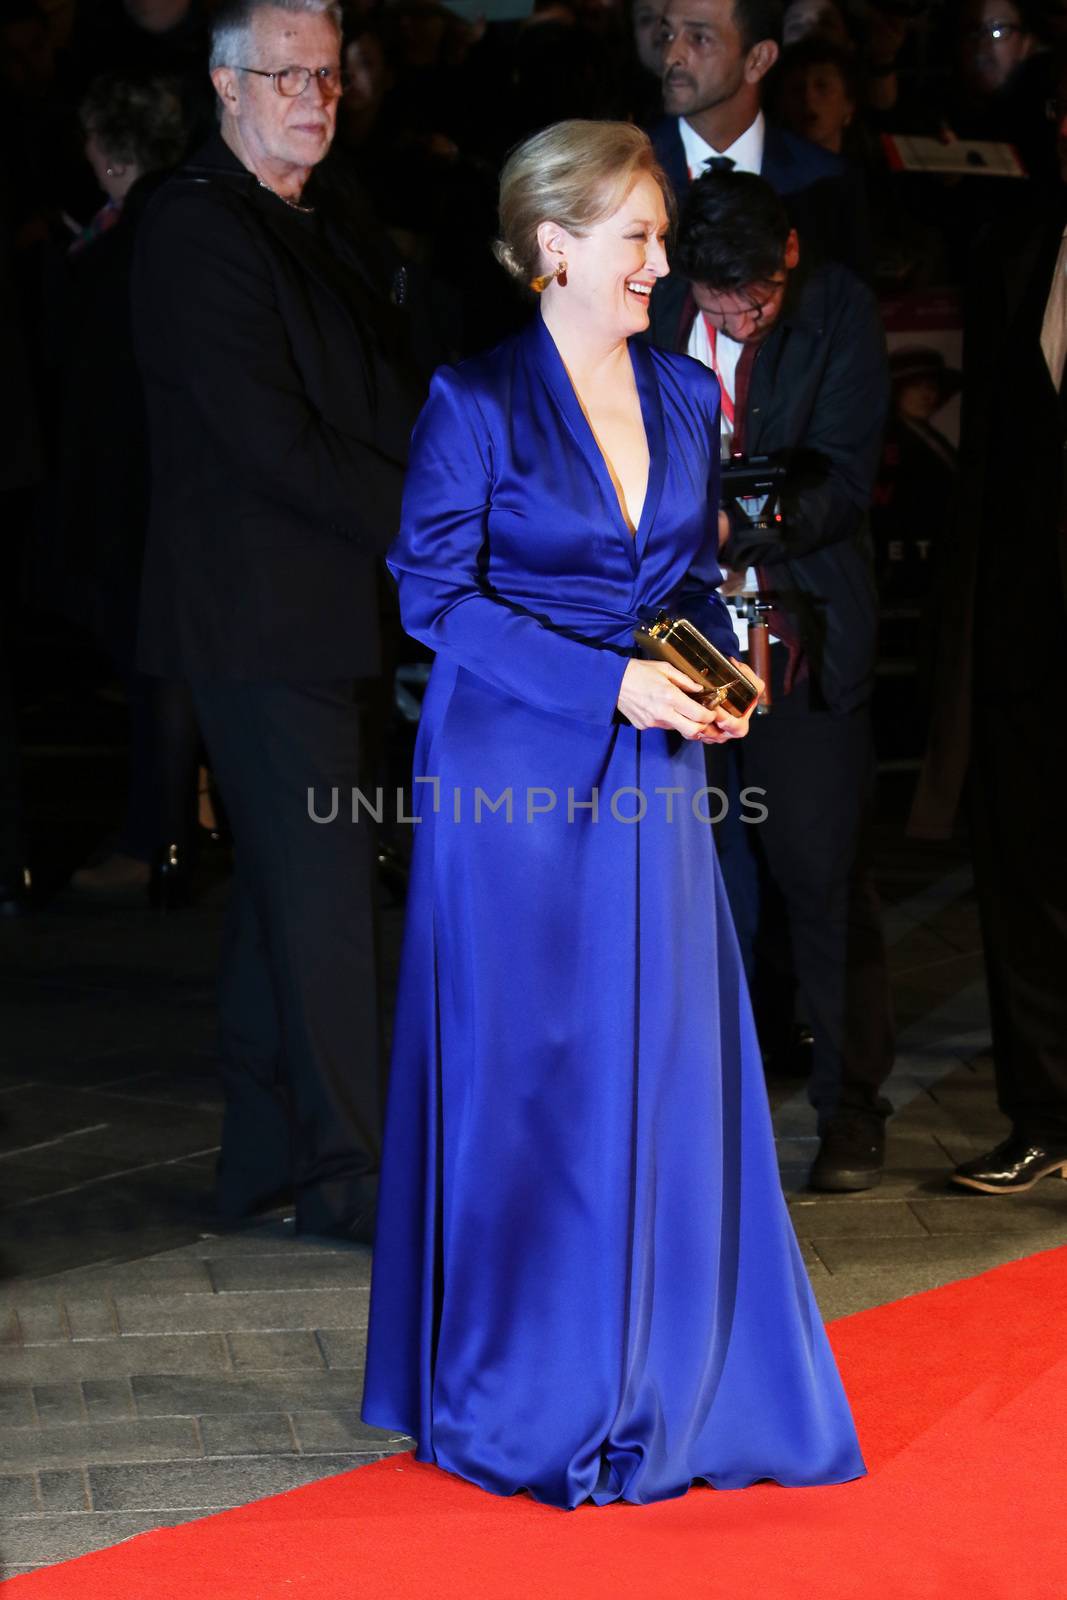 UNITED KINGDOM, London: Meryl Streep attends the screening of Suffragette on opening night of the BFI London Film Festival at London's Odeon Leicester Square on October 7, 2015. 